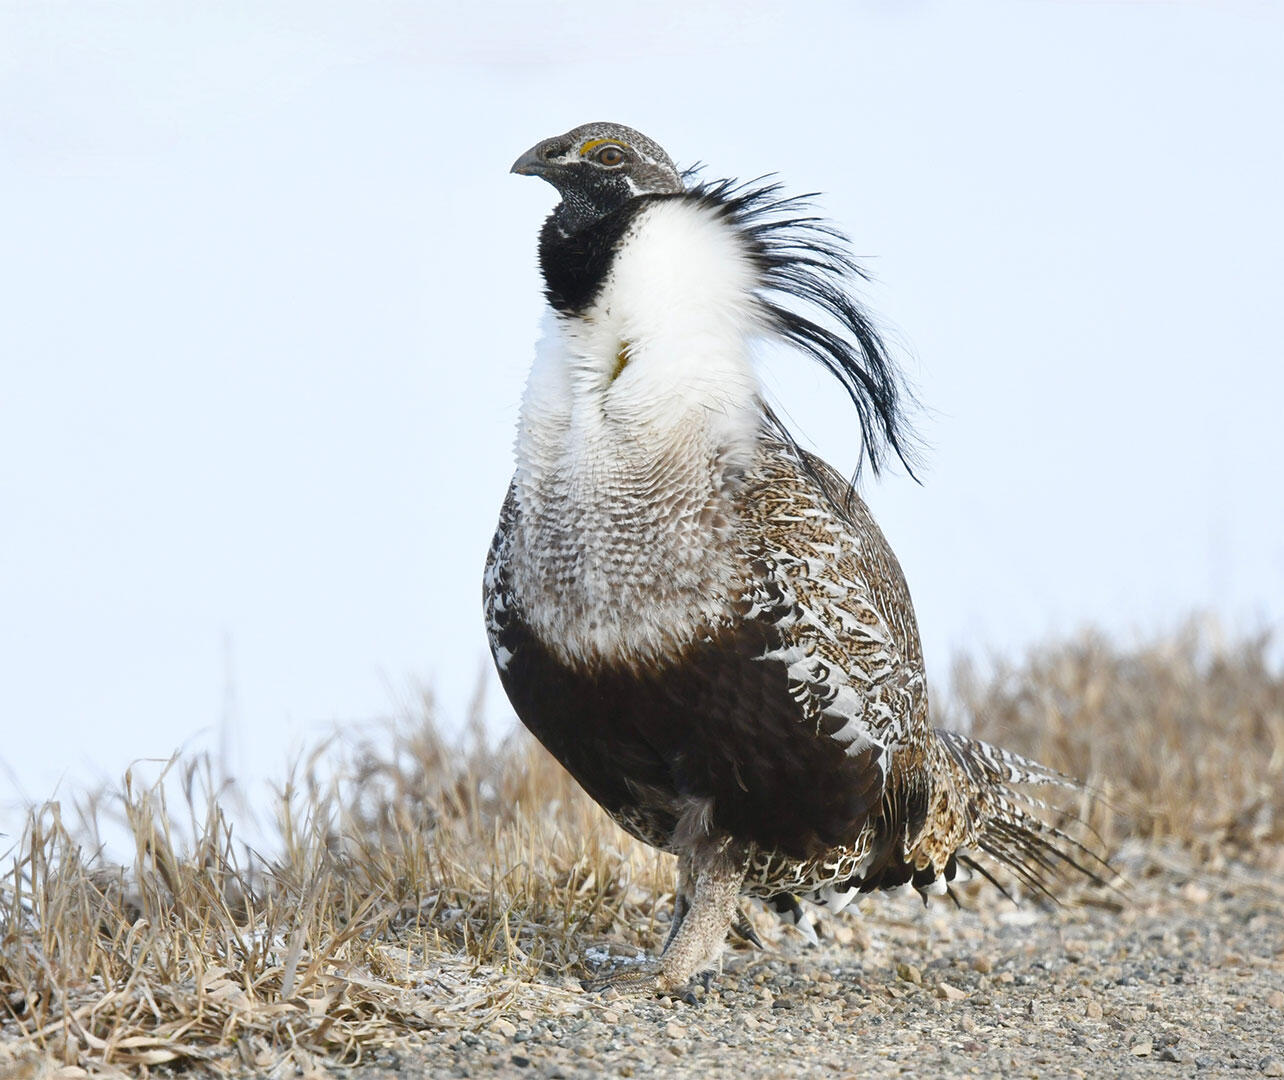 A stout brown and white bird stands in dry vegetation.